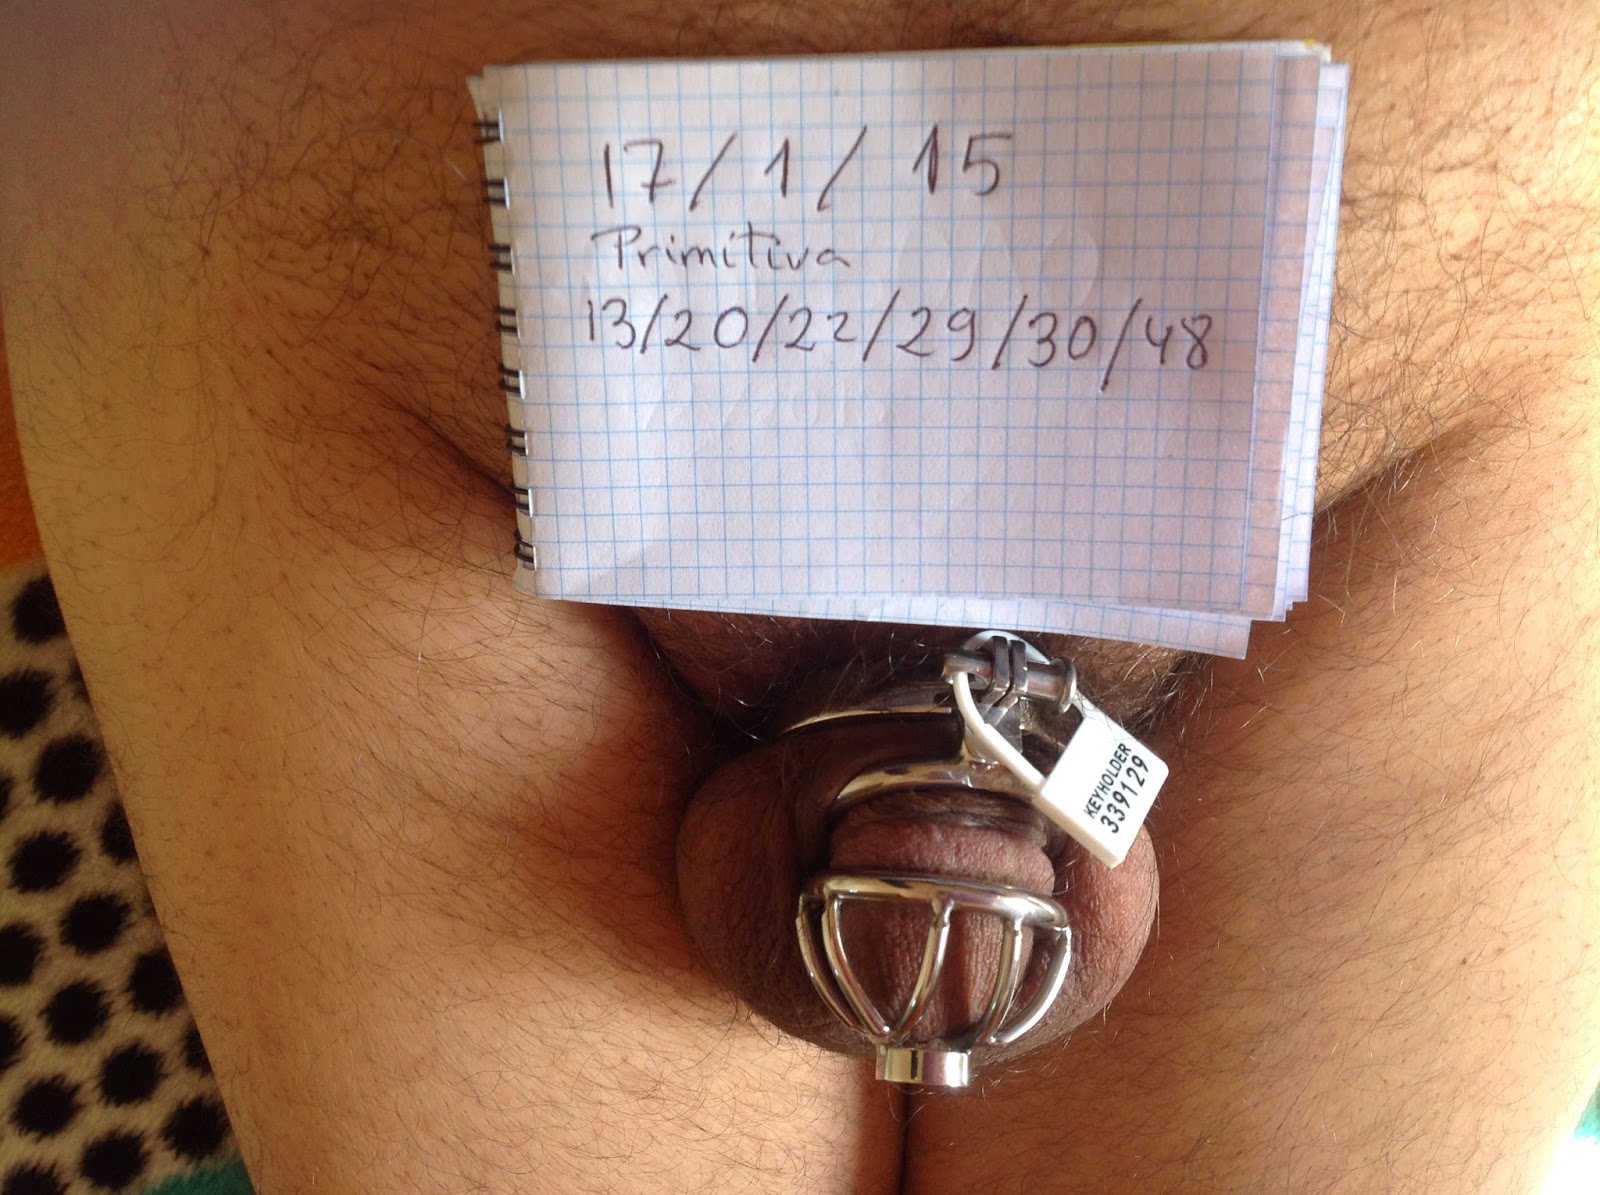 Second month in chastity